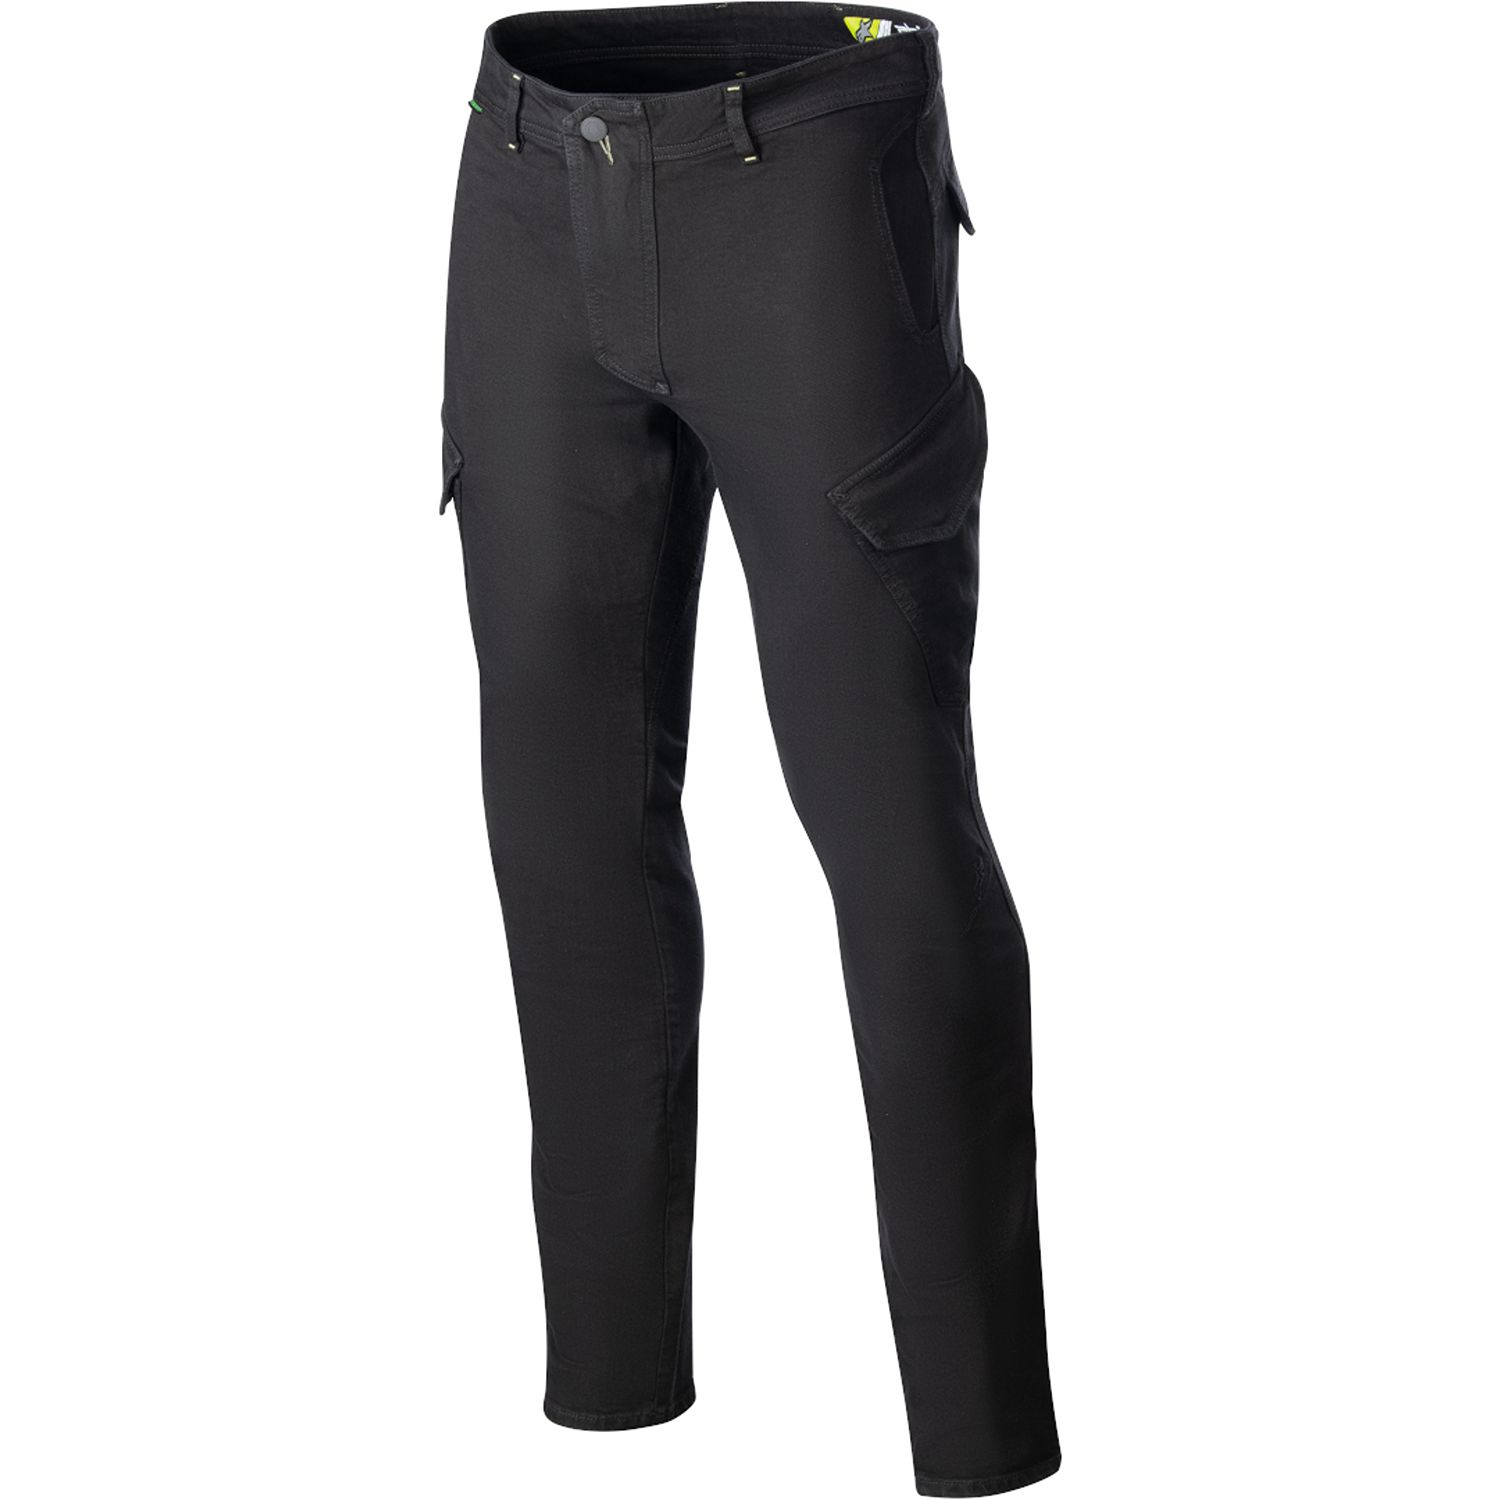 Image of Alpinestars Caliber Slim Fit Tech Riding Pants Anthracite Taille 38